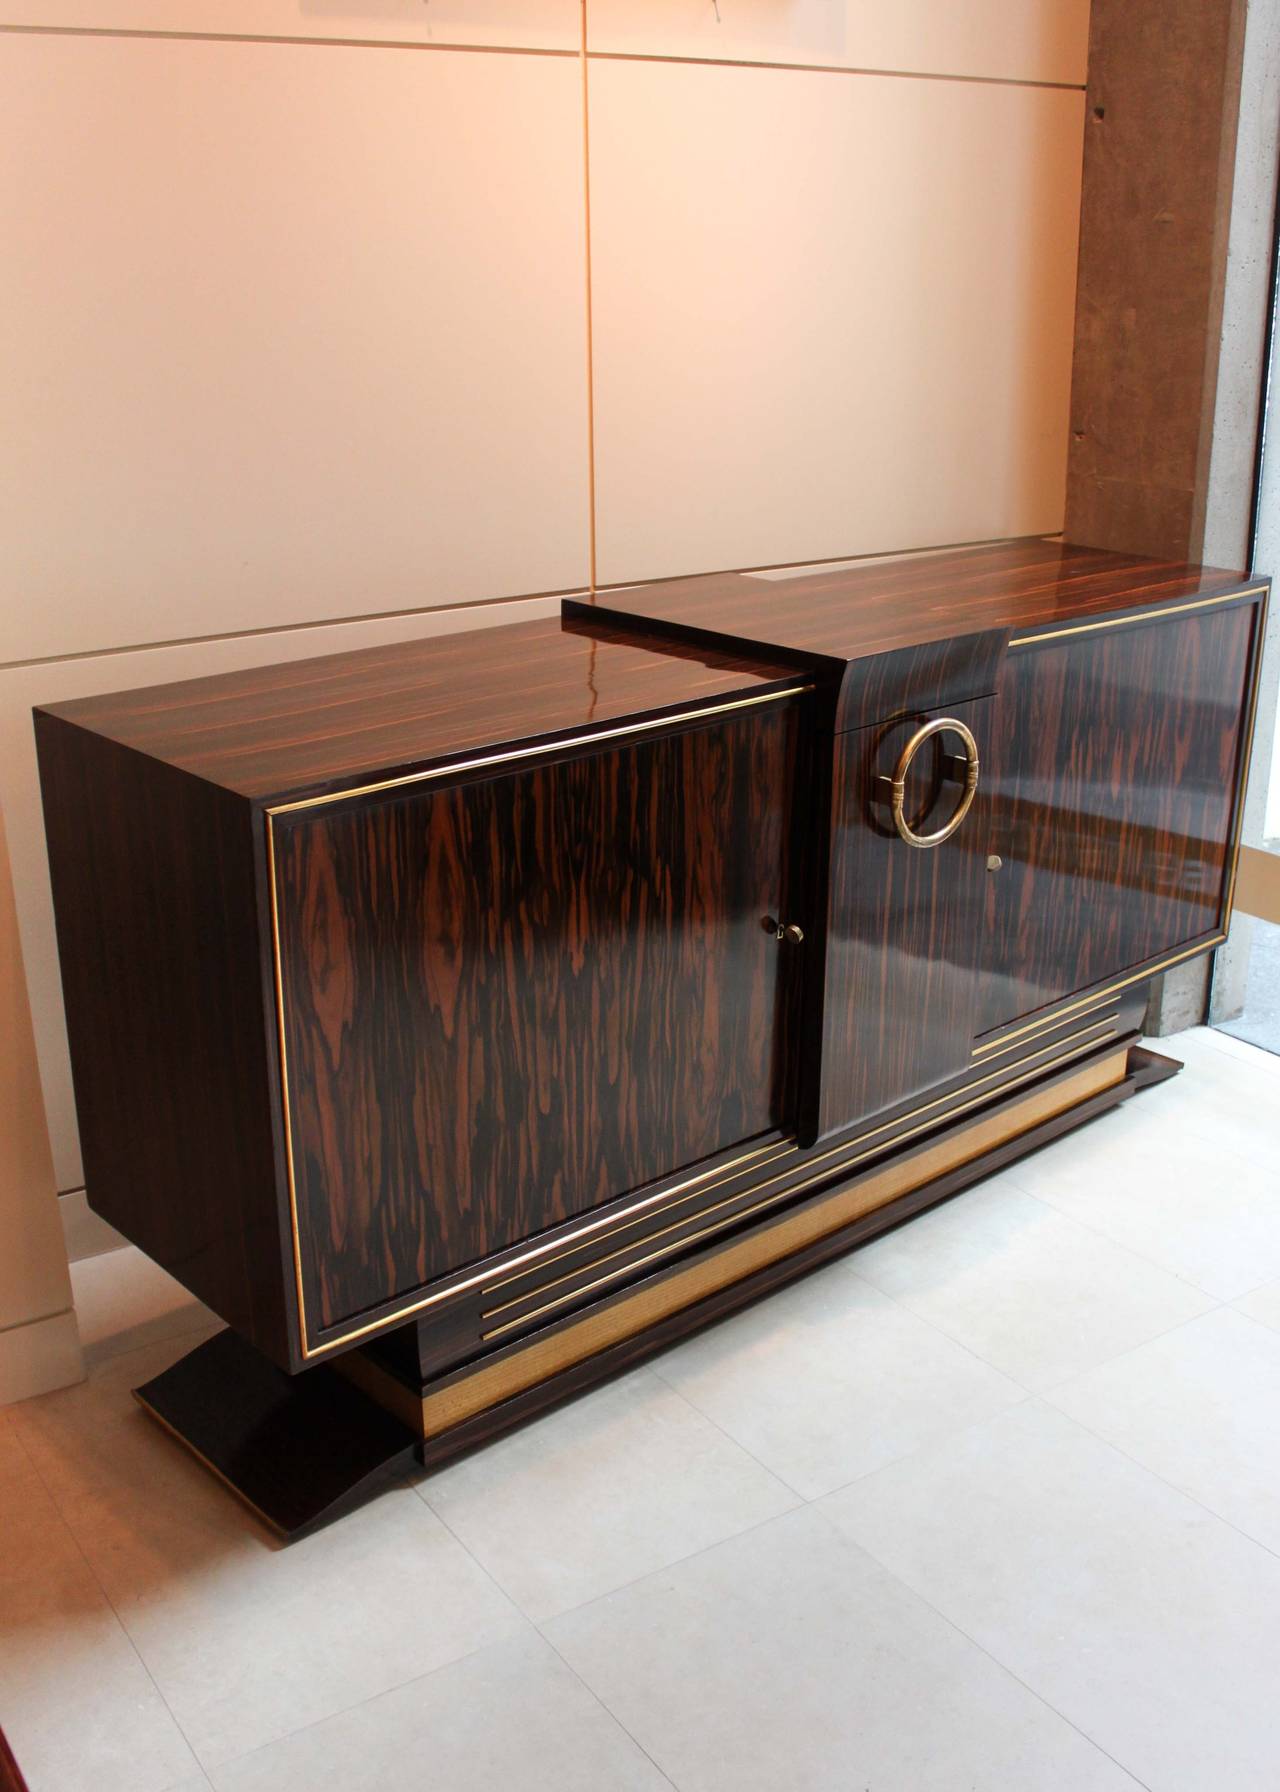 A fantastic example of the genre, this art moderne sideboard is completely original. Two lockable cabinets with deco keys flank a pull-out storage compartment for bottles. The impressive circular center handle resembling jewelry serves as the main